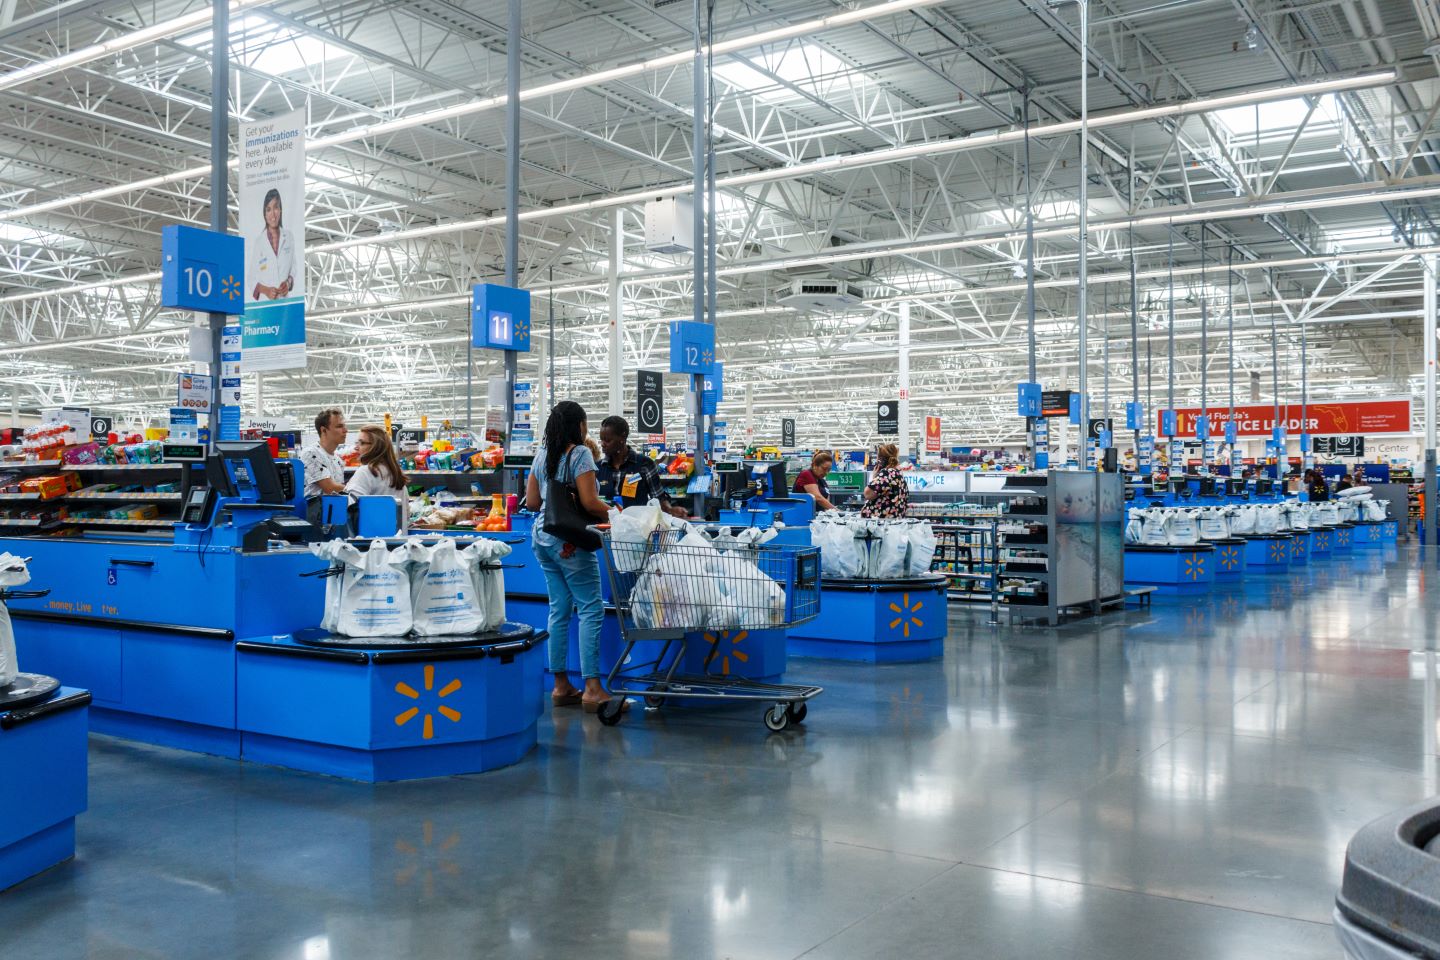 Walmart calls for flexibility as NRF says US retail will hit $5.28trn  just